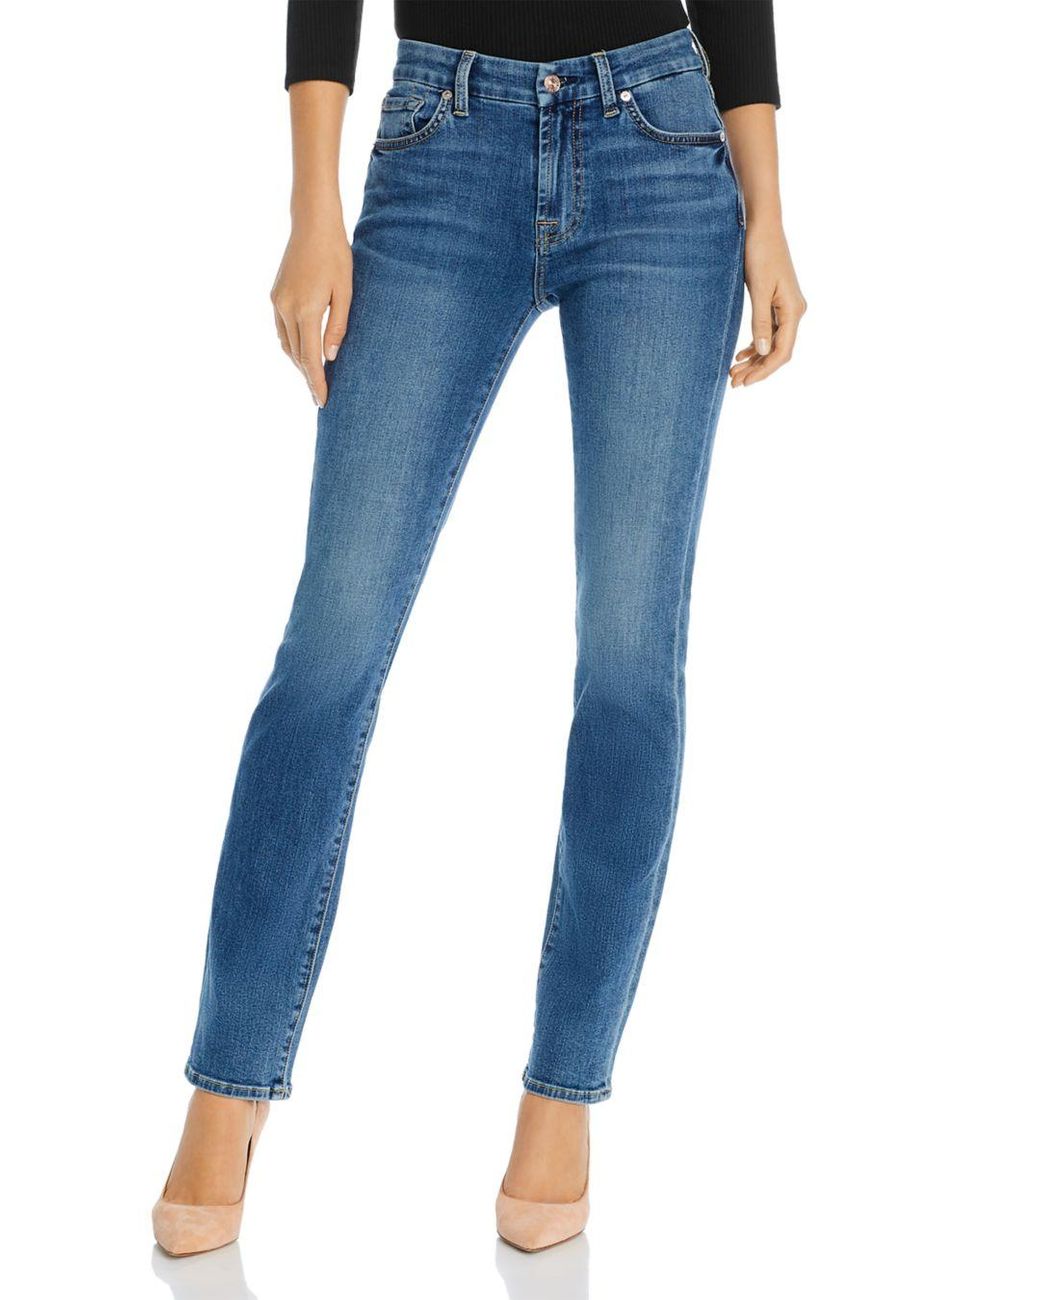 7 For All Mankind Denim Kimmie Straight - Leg Jeans In Bair Authentic ...